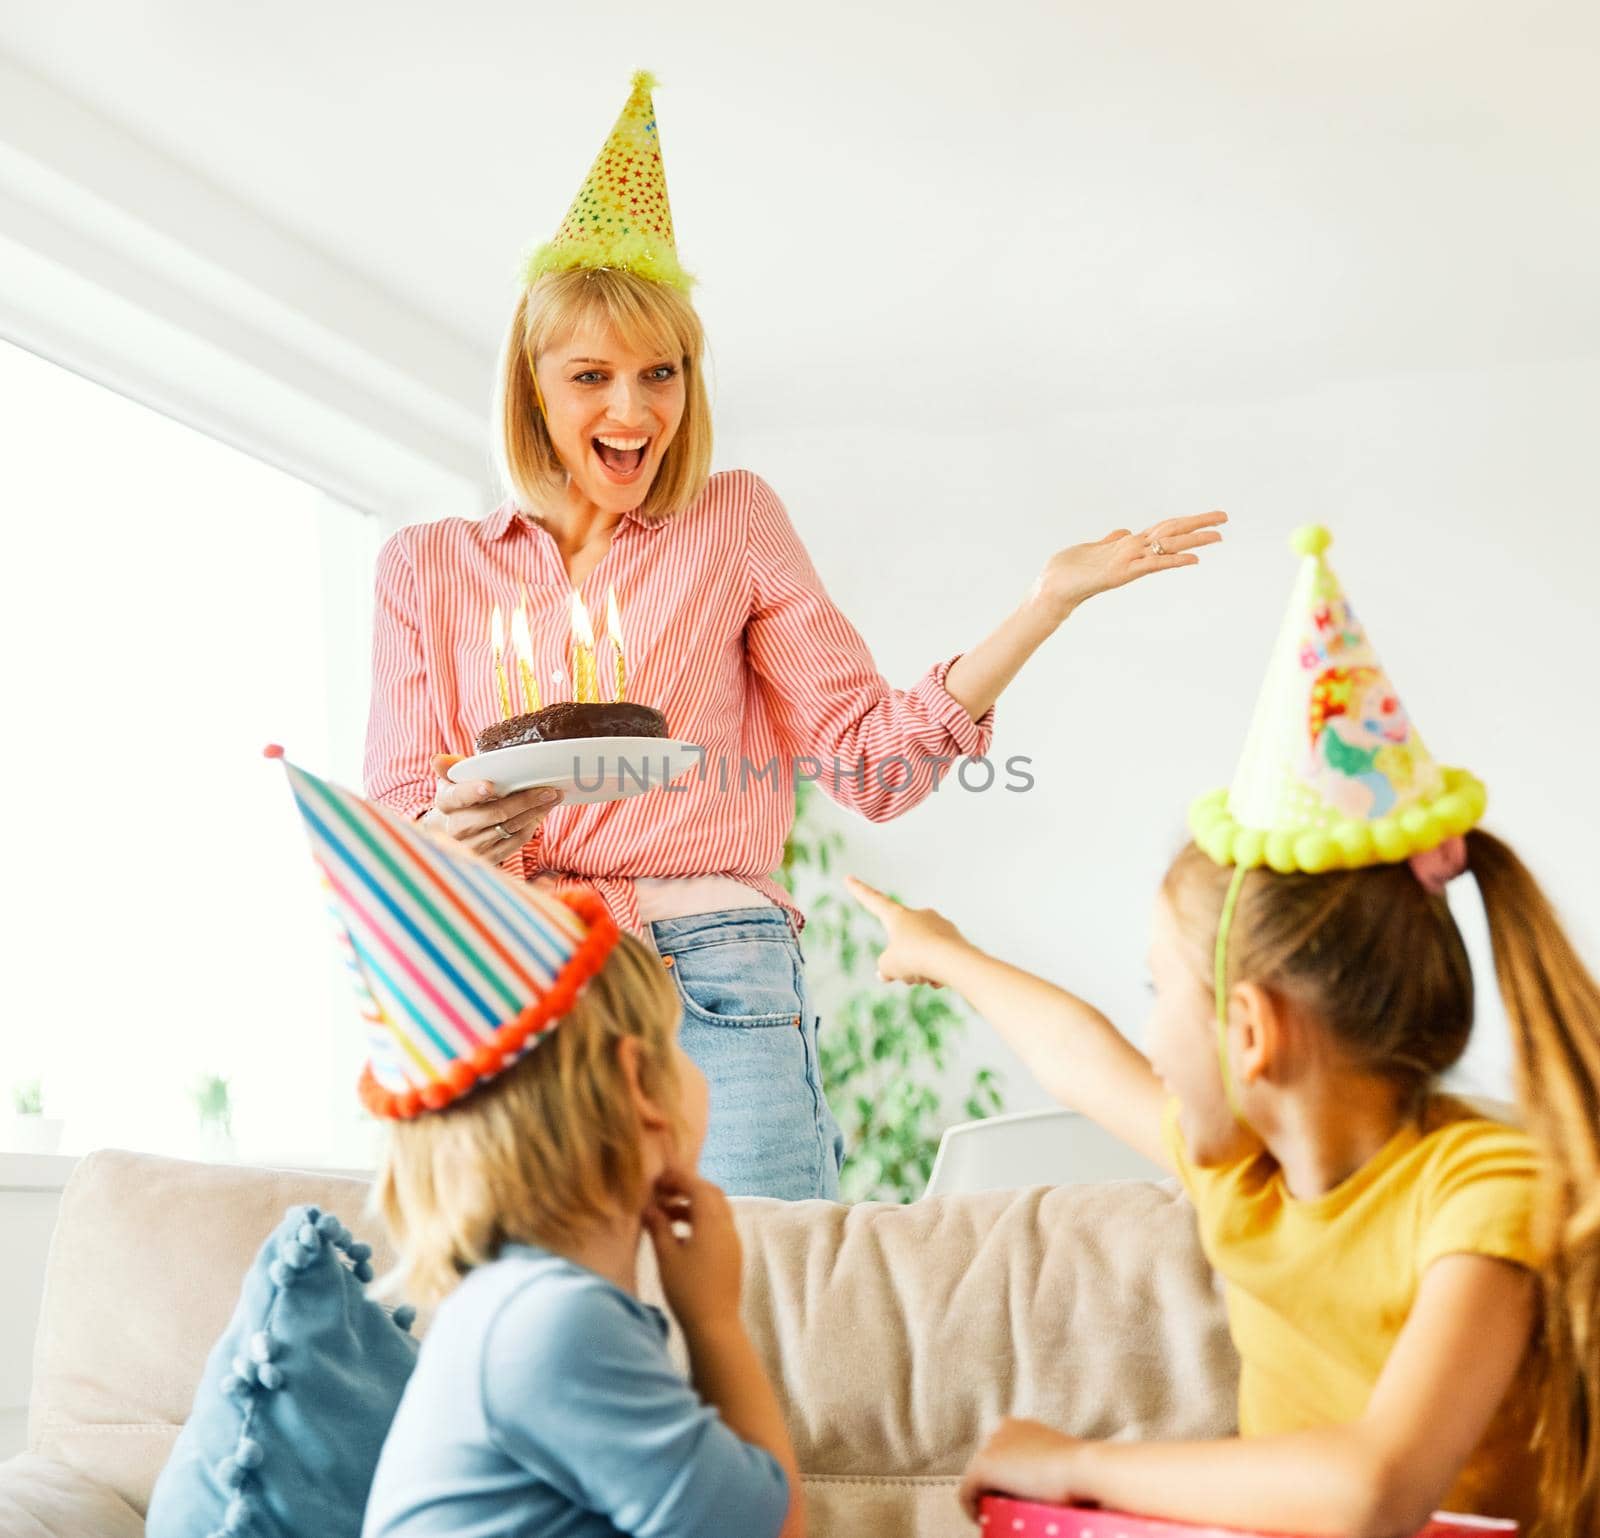 Family of four, mother, father, daughter and son having fun celebrating a birthday together with birthday cake and candles and a present at home